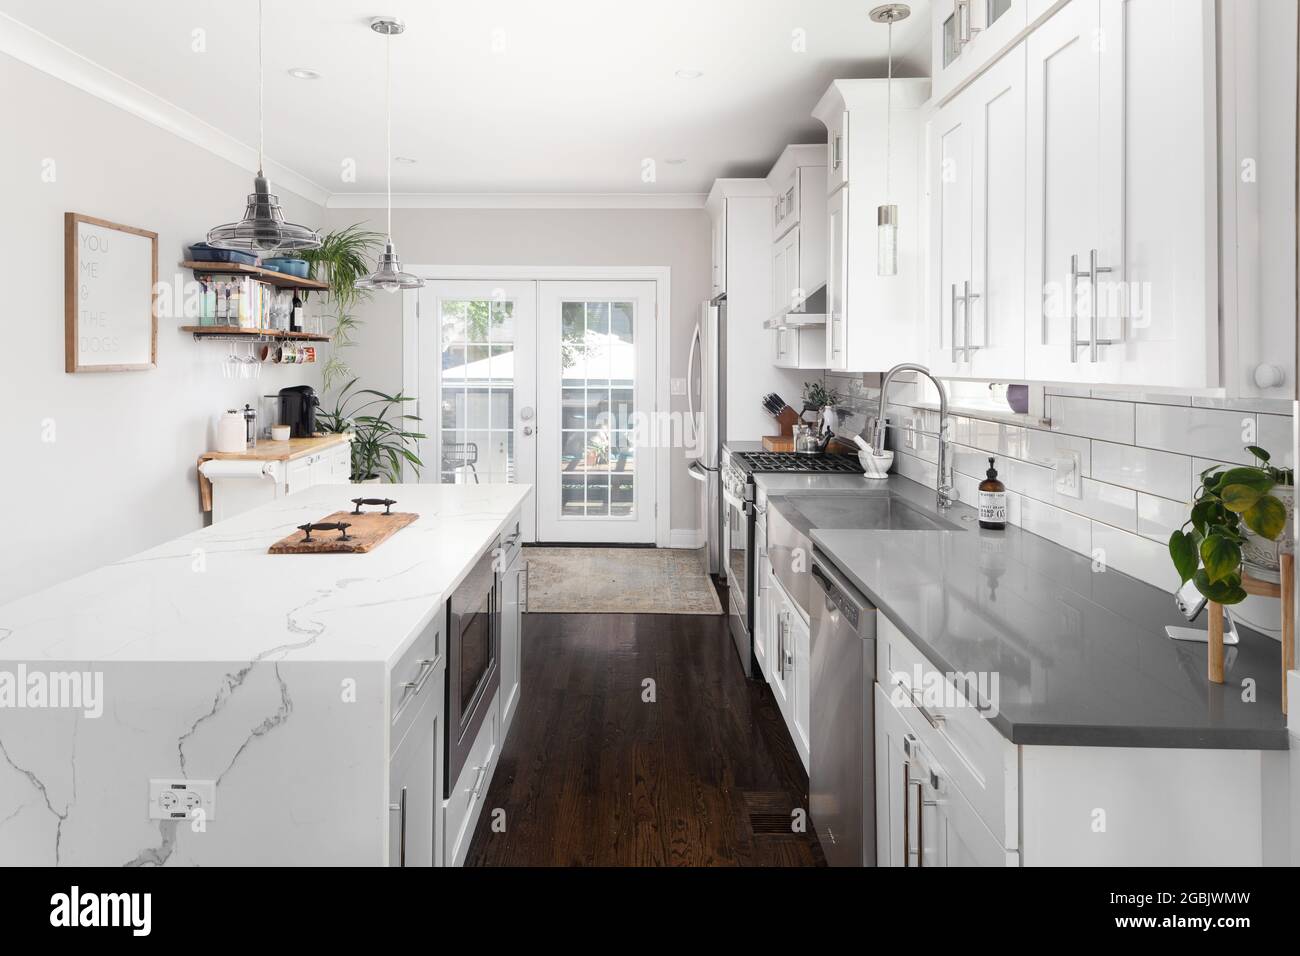 A white renovated kitchen with a waterfall granite island, stainless steel Whirlpool appliances, and hardwood floors. Stock Photo